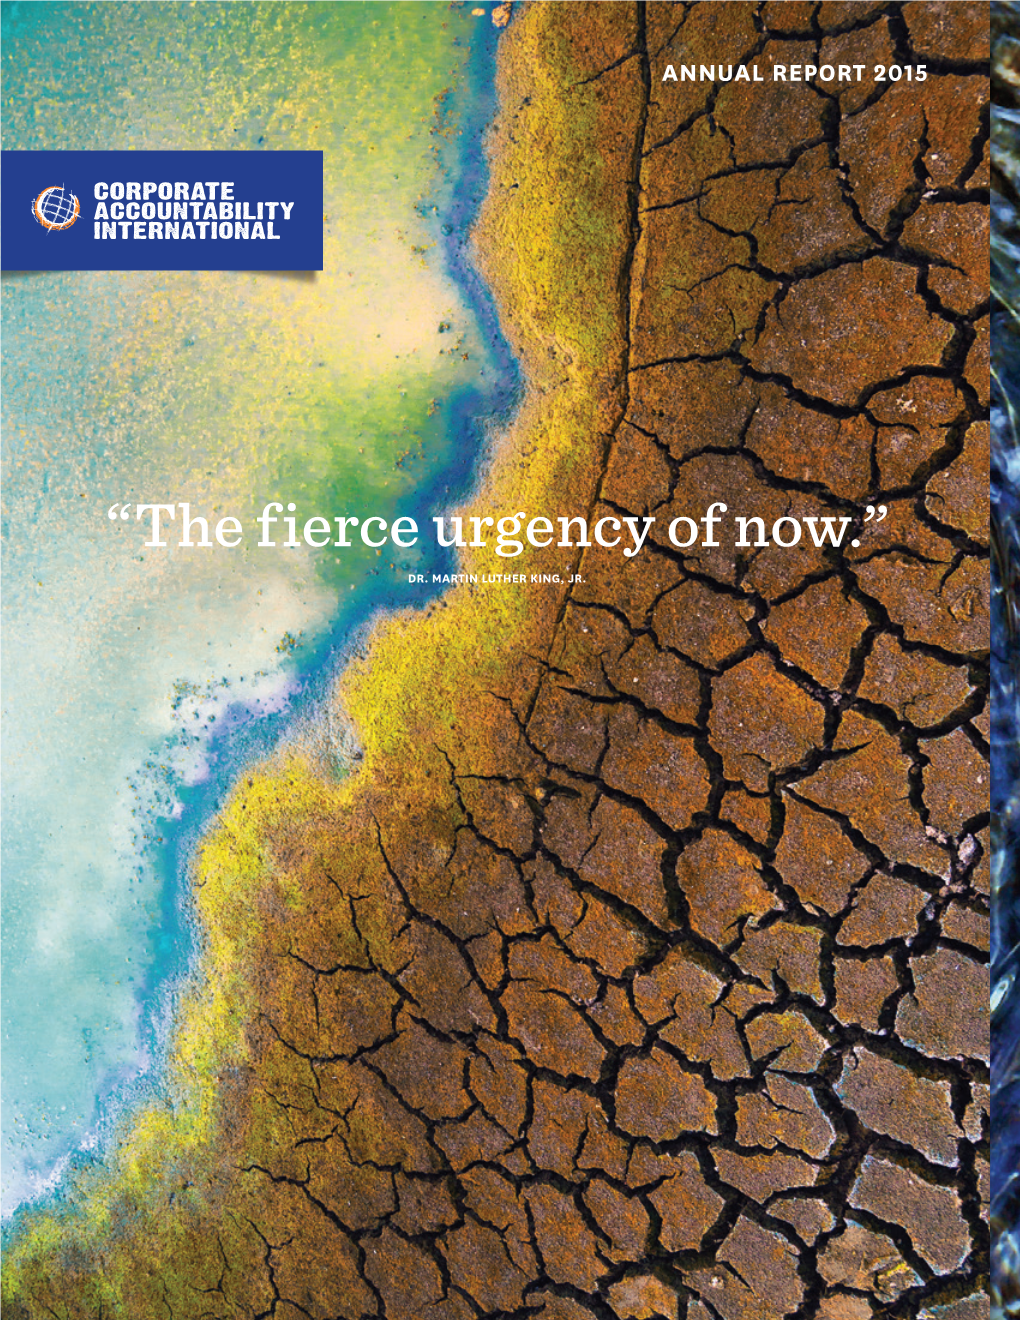 “The Fierce Urgency of Now.” DR